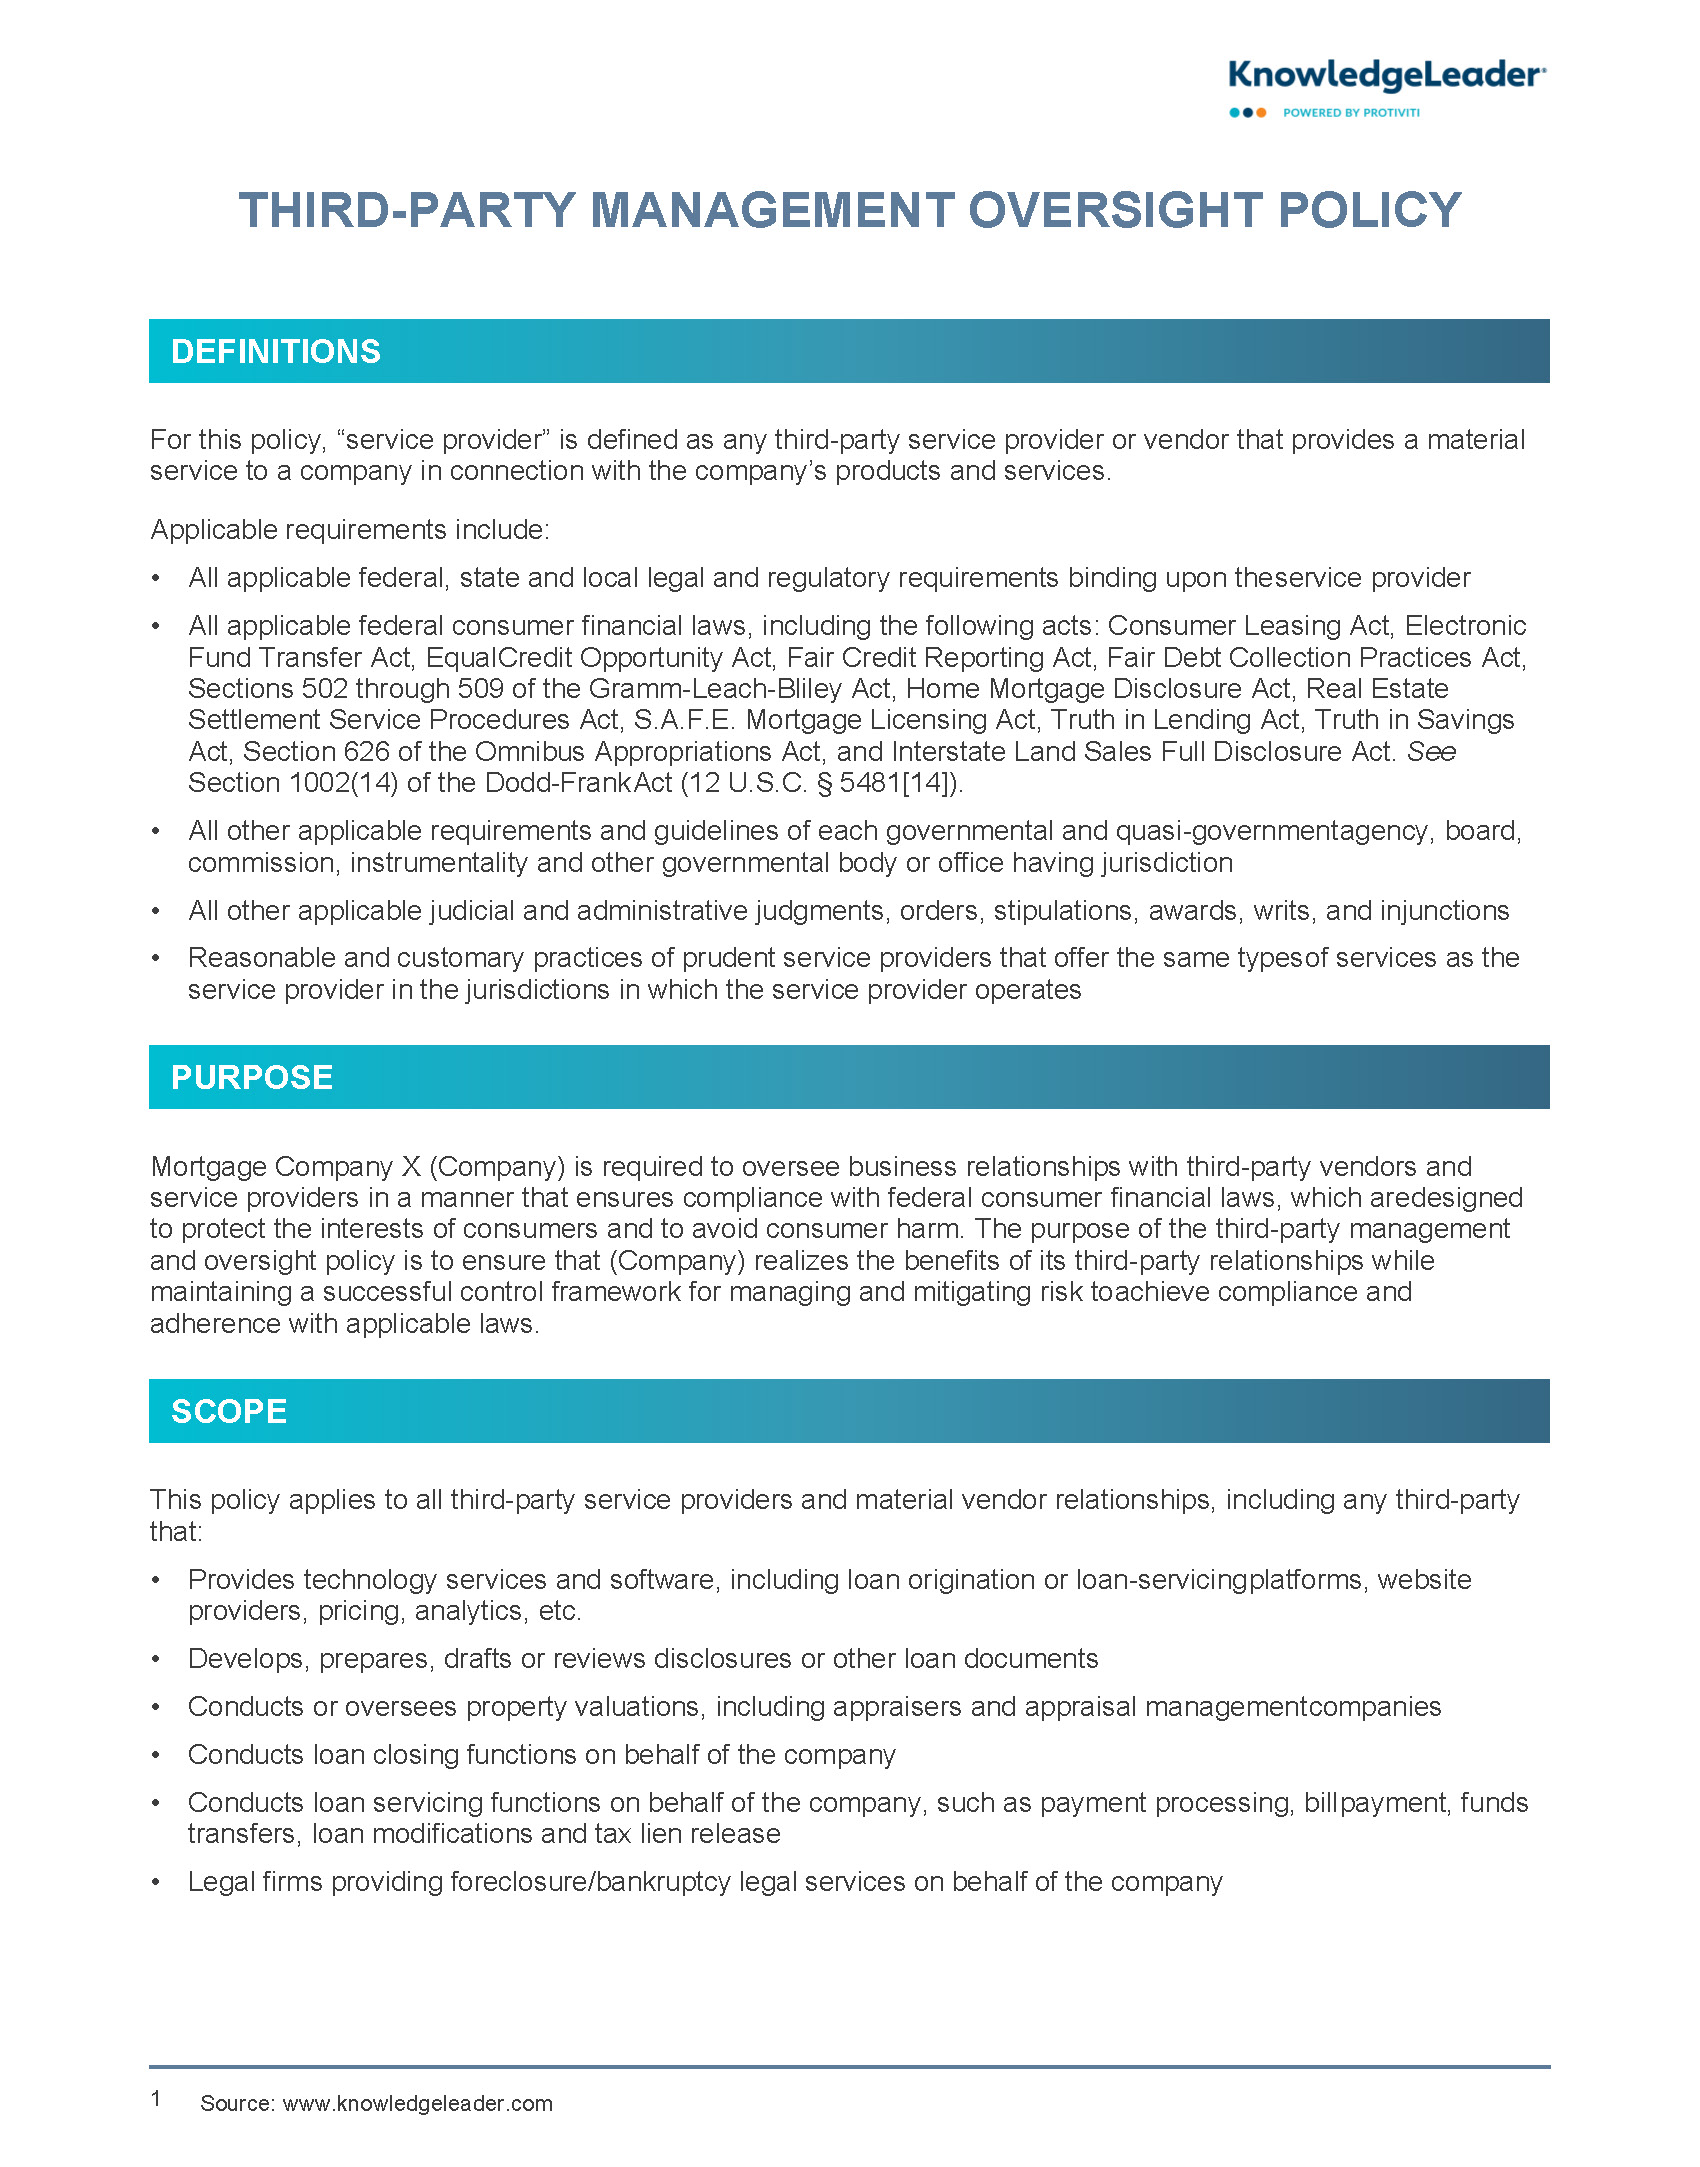 Screenshot of the first page of Third-Party Management Oversight Policy